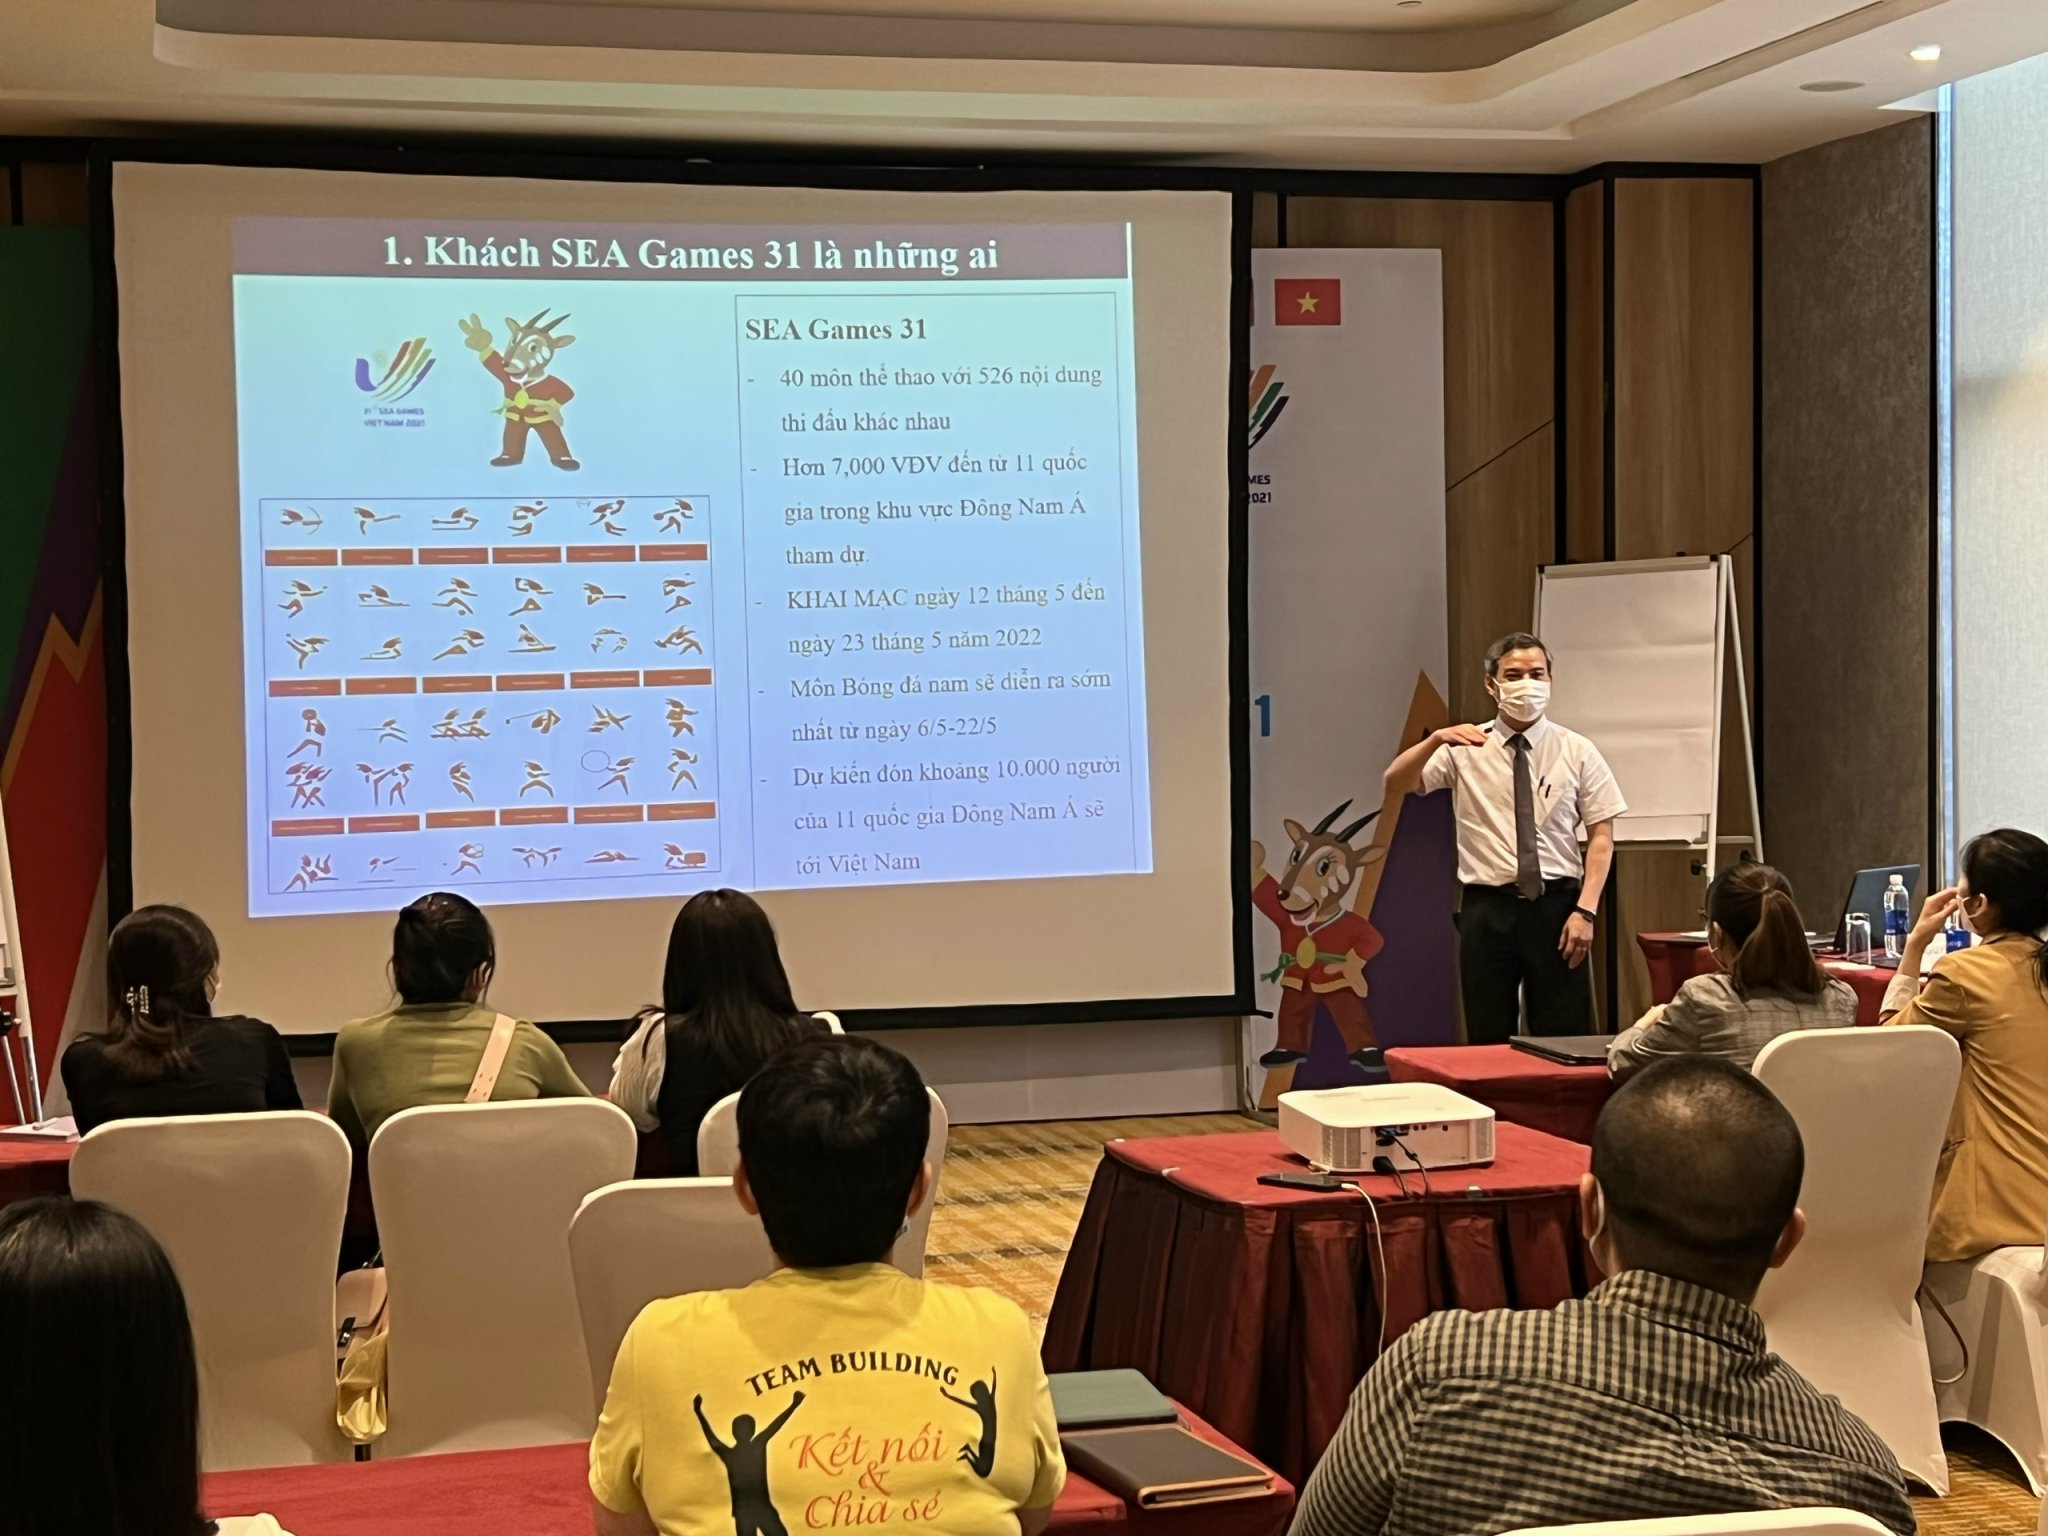 Professional training for accommodation staffs to prepare for 31st SEA Games